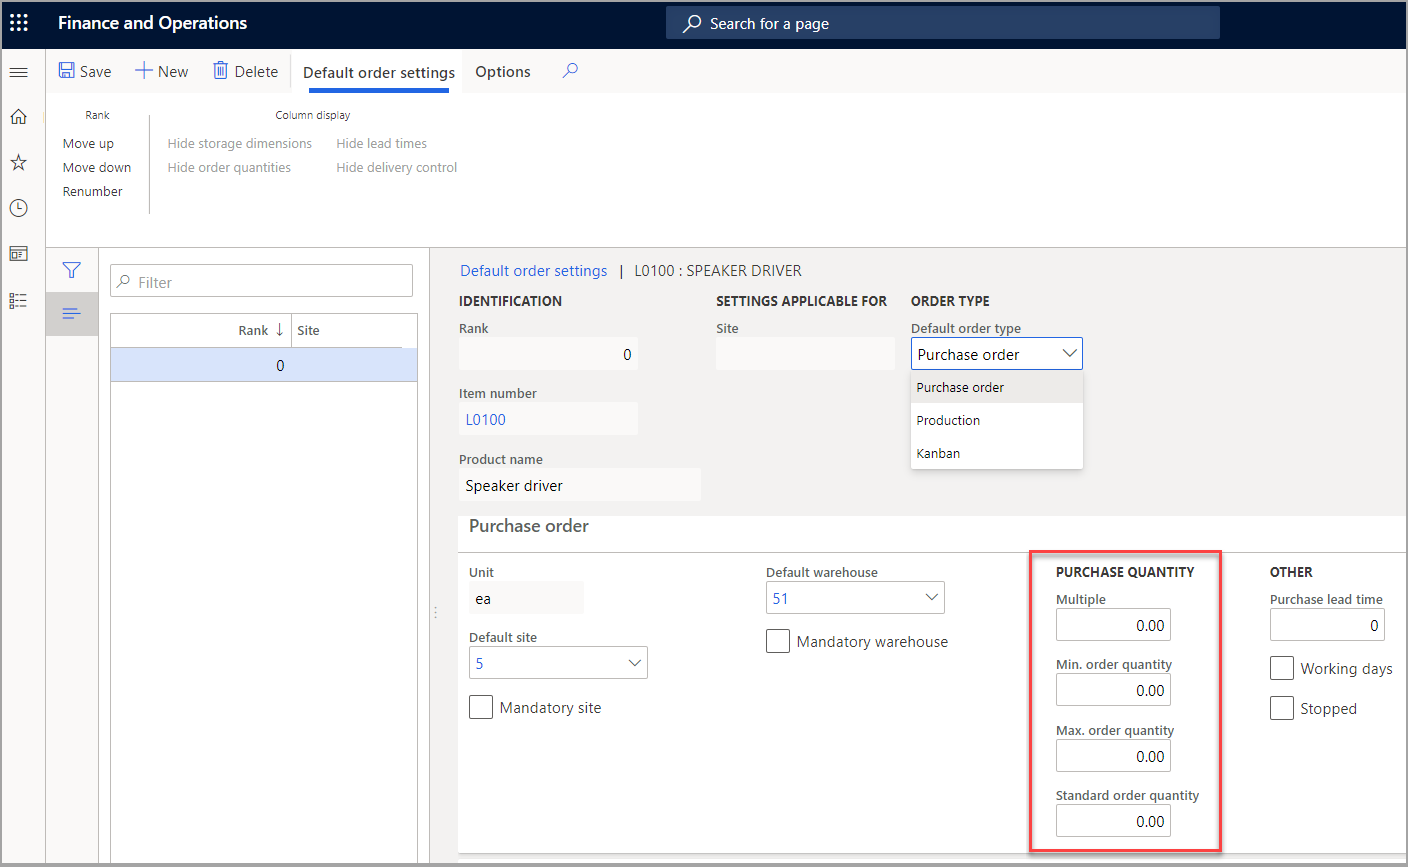  Screenshot of the Default order settings page showing the Purchase quantity fields.